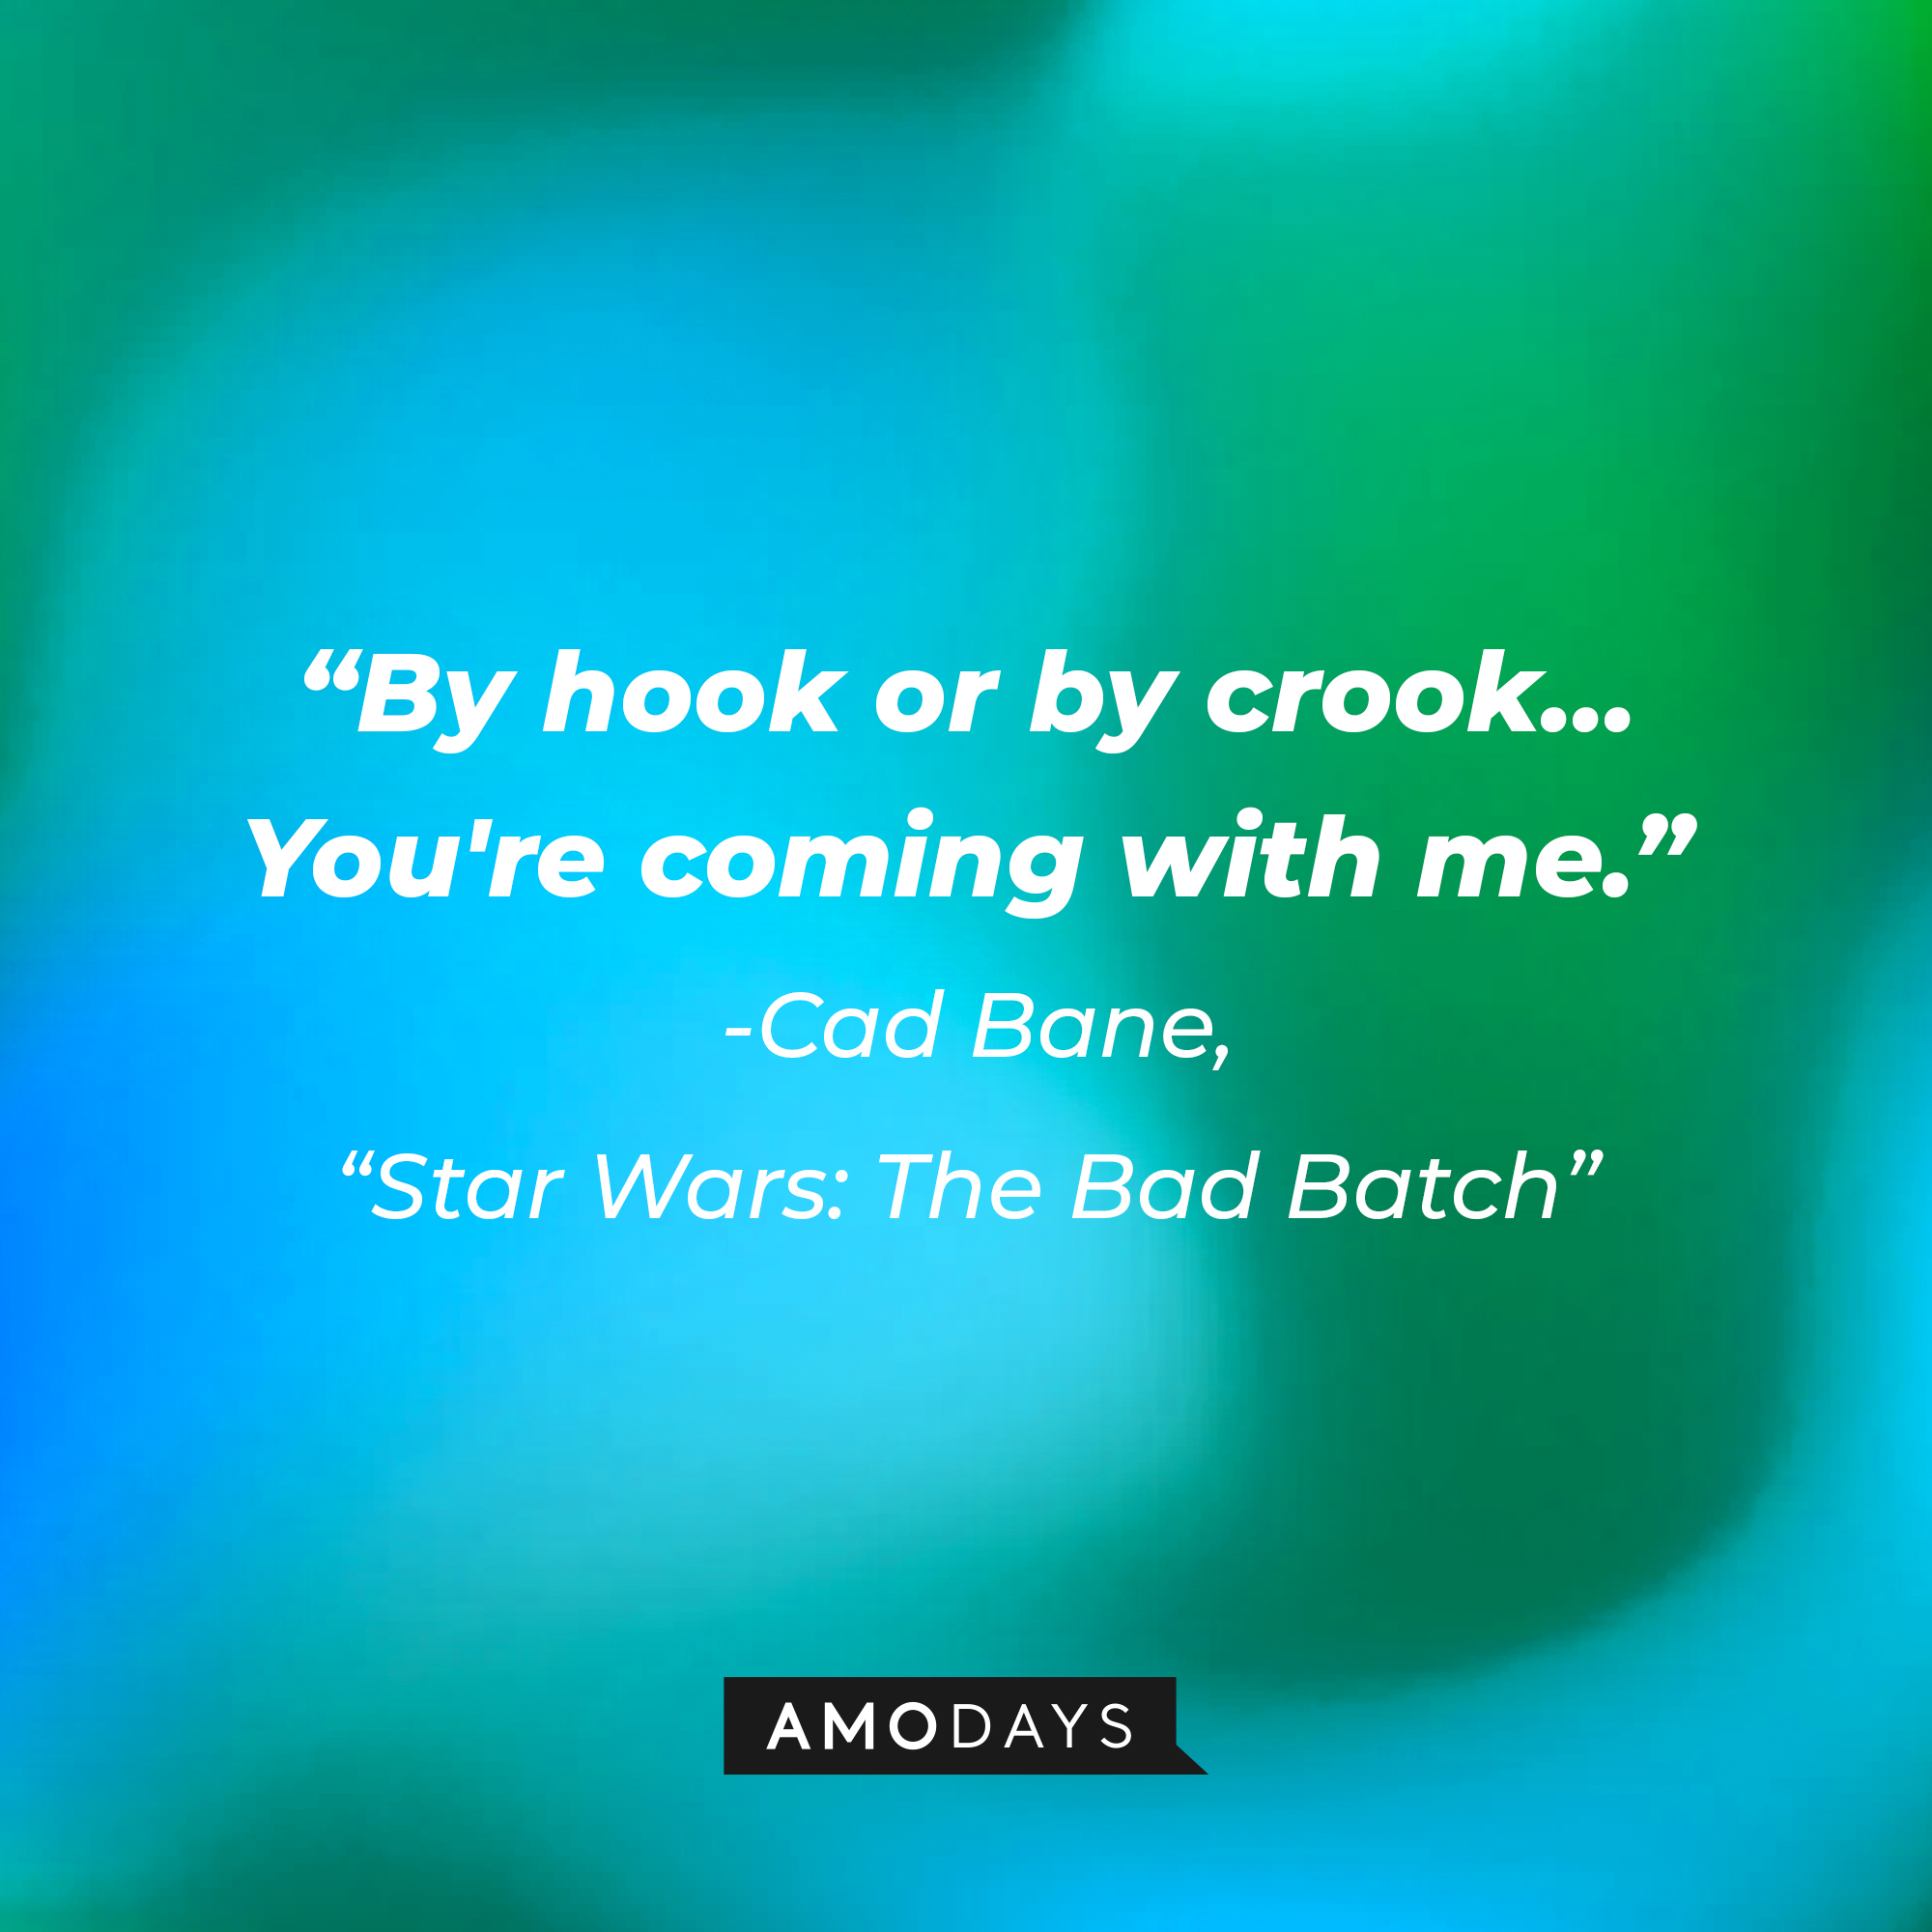 Cad Bane’s quote:  "By hook or by crook… You're coming with me. " | Image: AmoDays